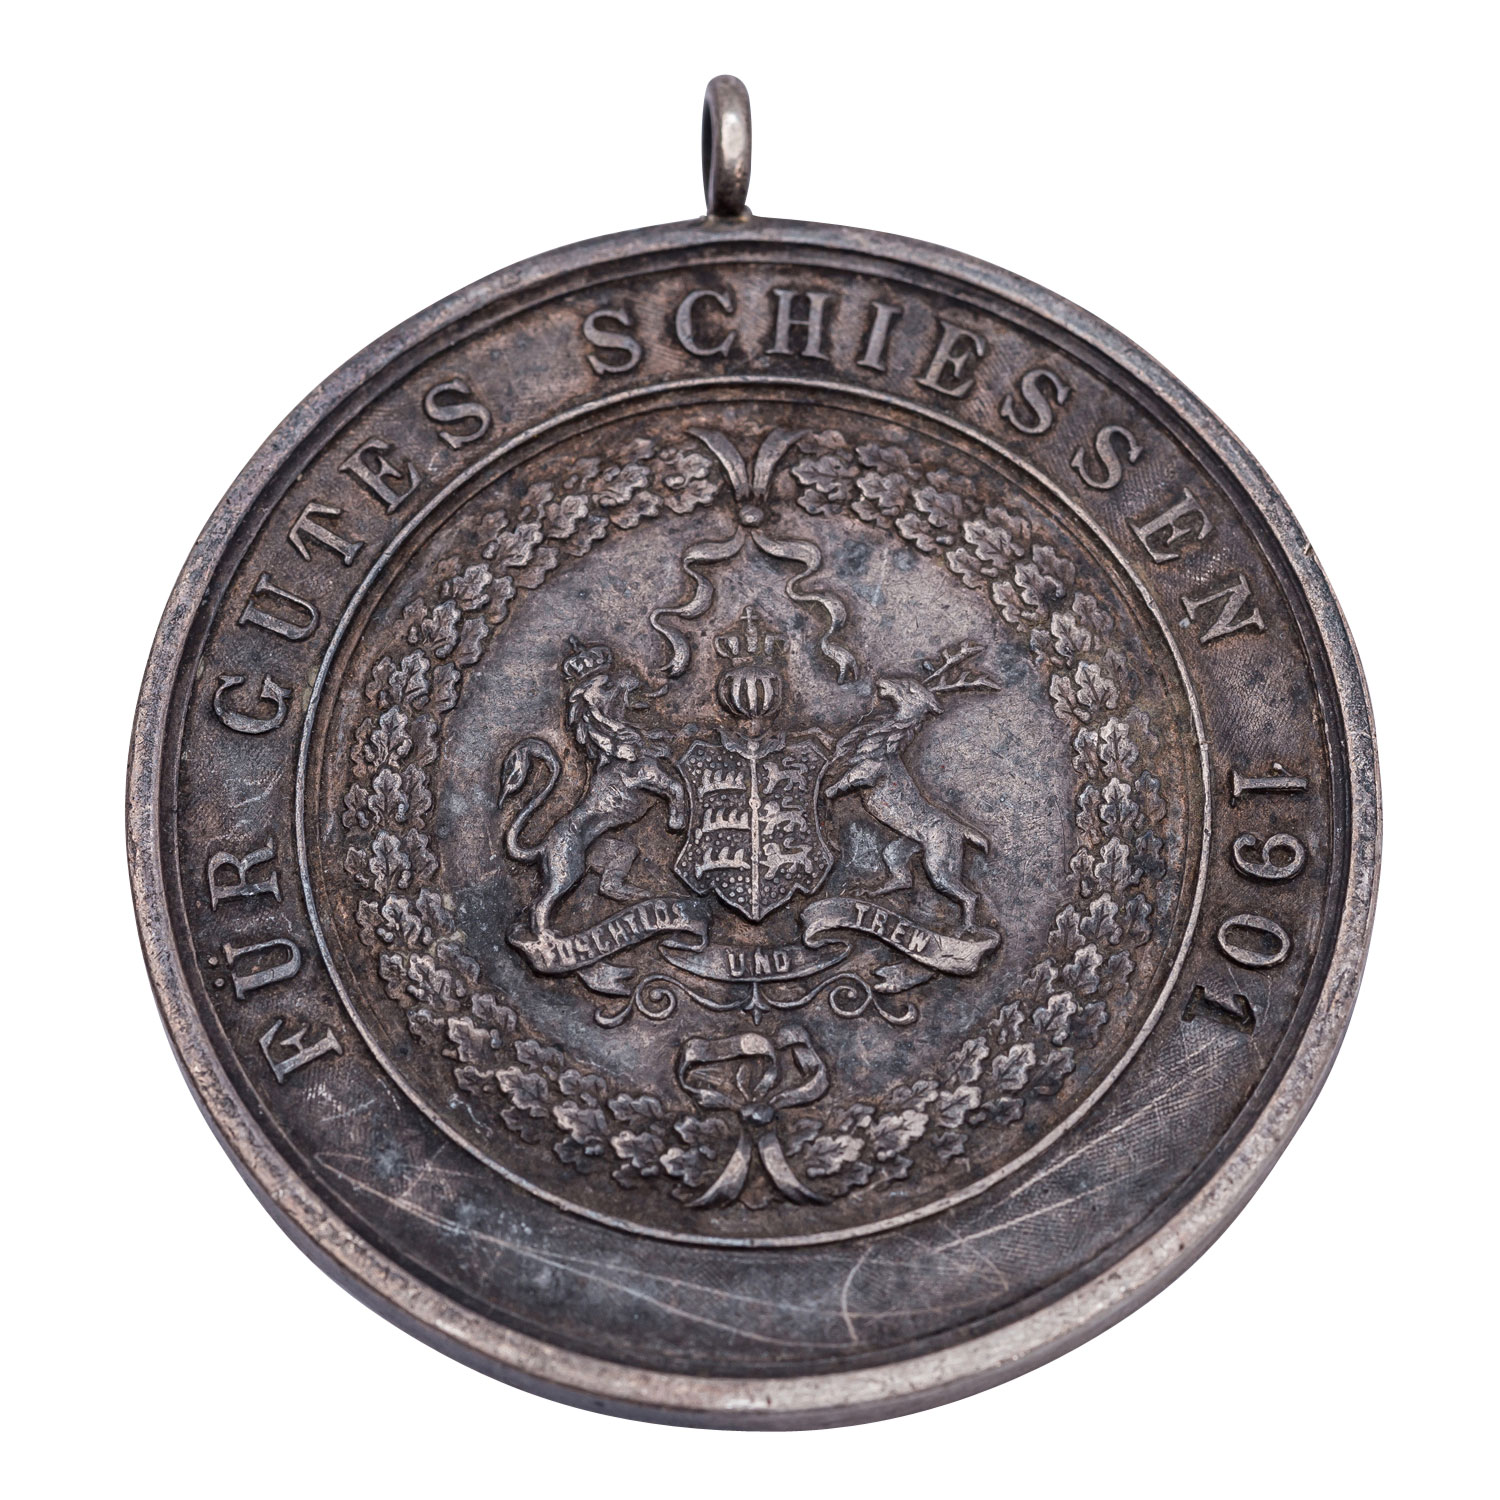 Württemberg - Silberne Prämienmedaille mit Trageöse Anfang 20.Jh., - Image 2 of 2